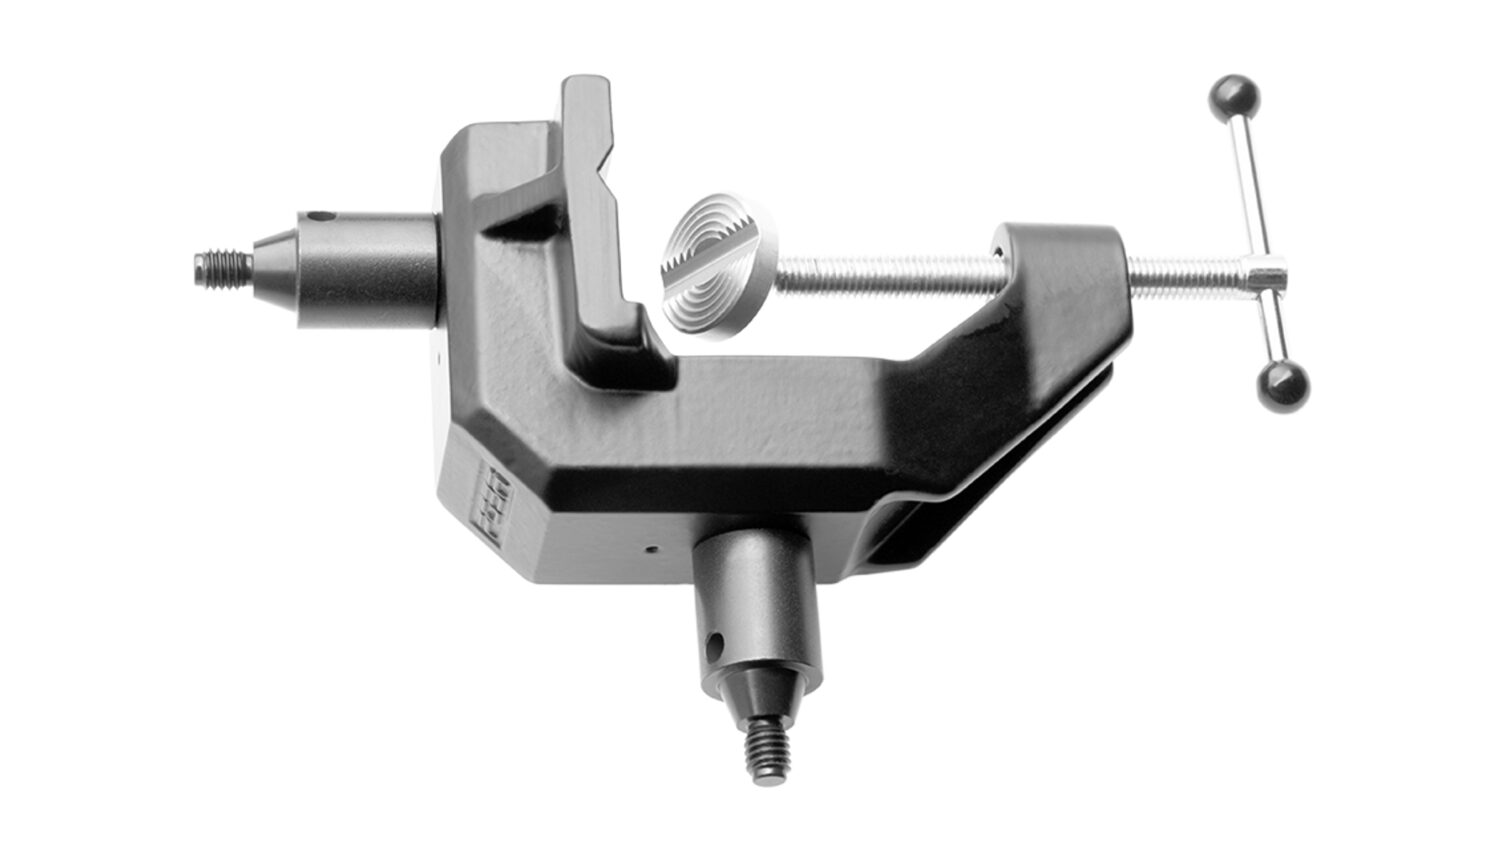 FOBA clamp for clamp stand with combitube adapter